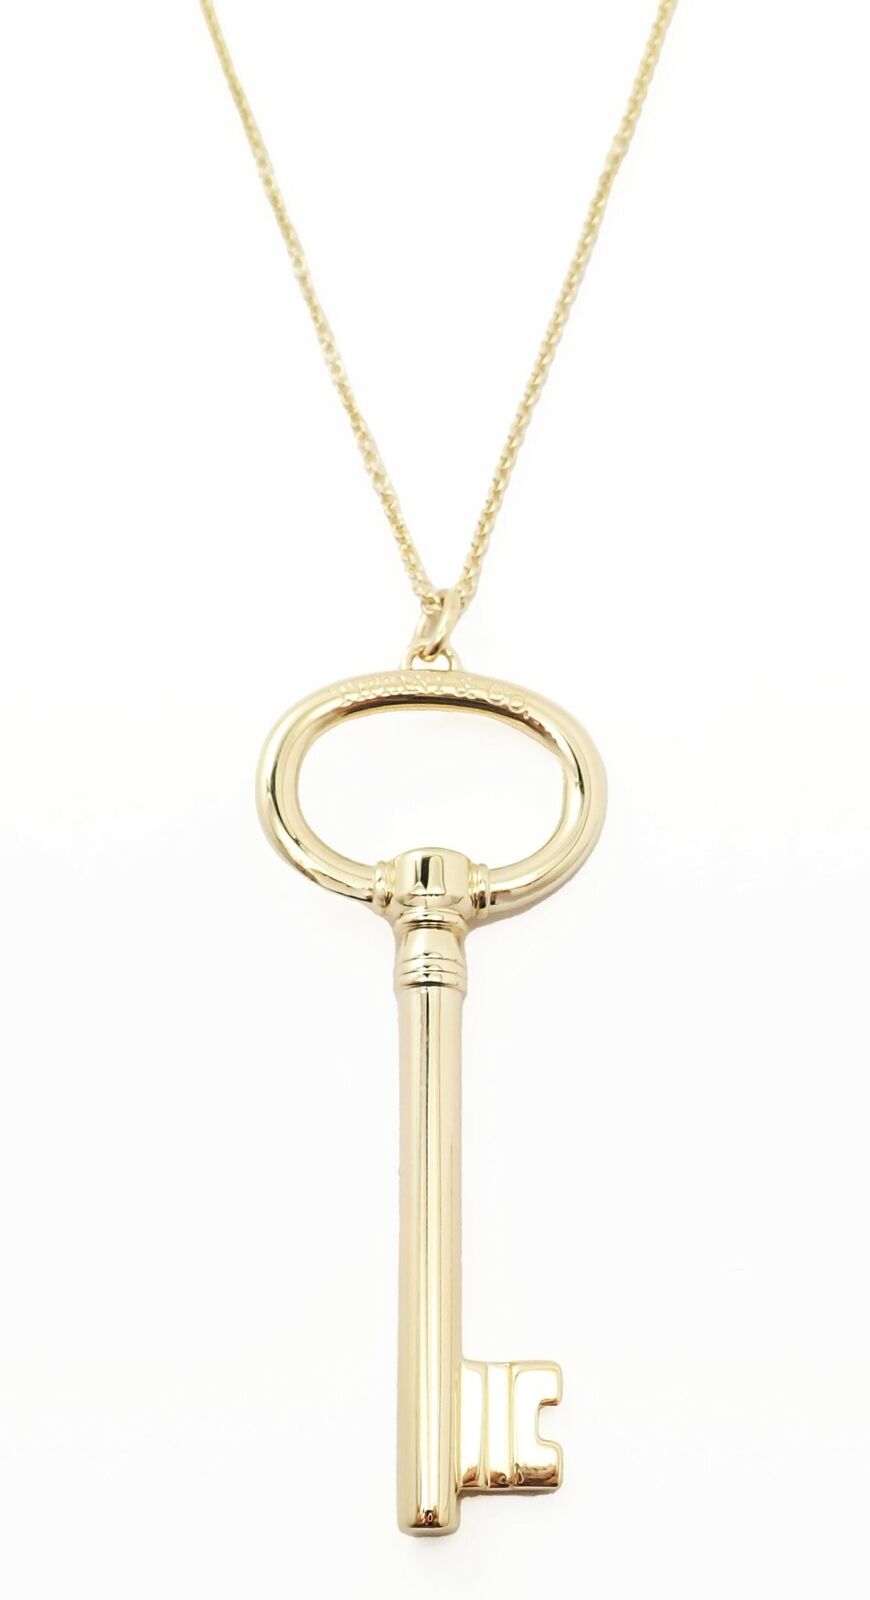 Tiffany & Co Jewelry & Watches:Fine Jewelry:Necklaces & Pendants Authentic! Tiffany & Co 18k Yellow Gold Oval Key Pendant Necklace